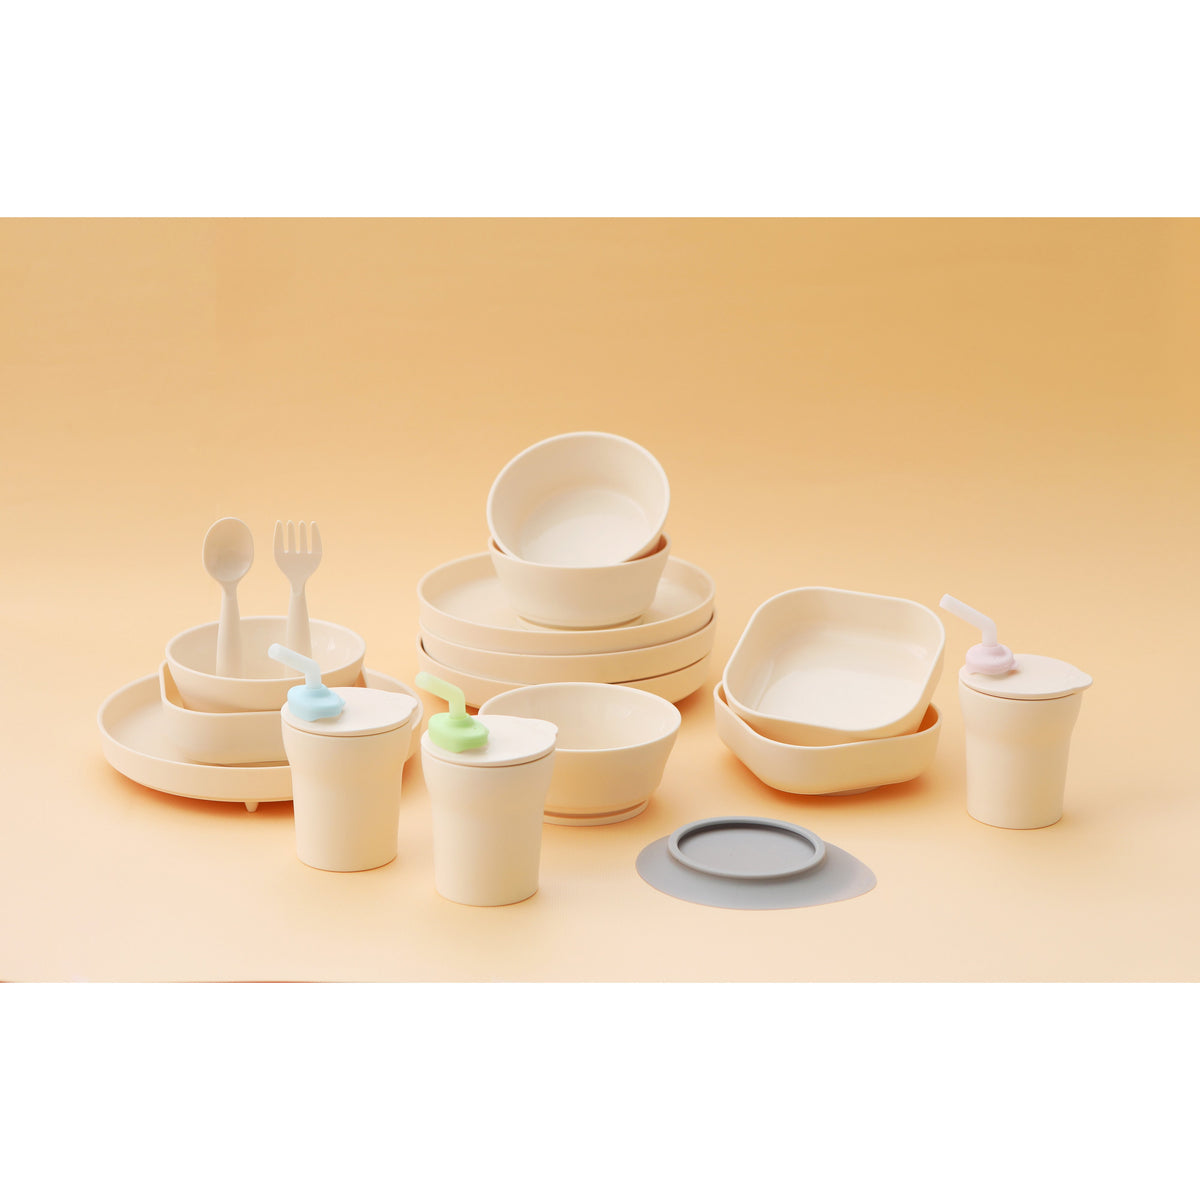 miniware-healthy-meal-set-pla-smart-divider-suction-plate-in-vanilla-+-silicone-divider-in-cotton-candy- (15)